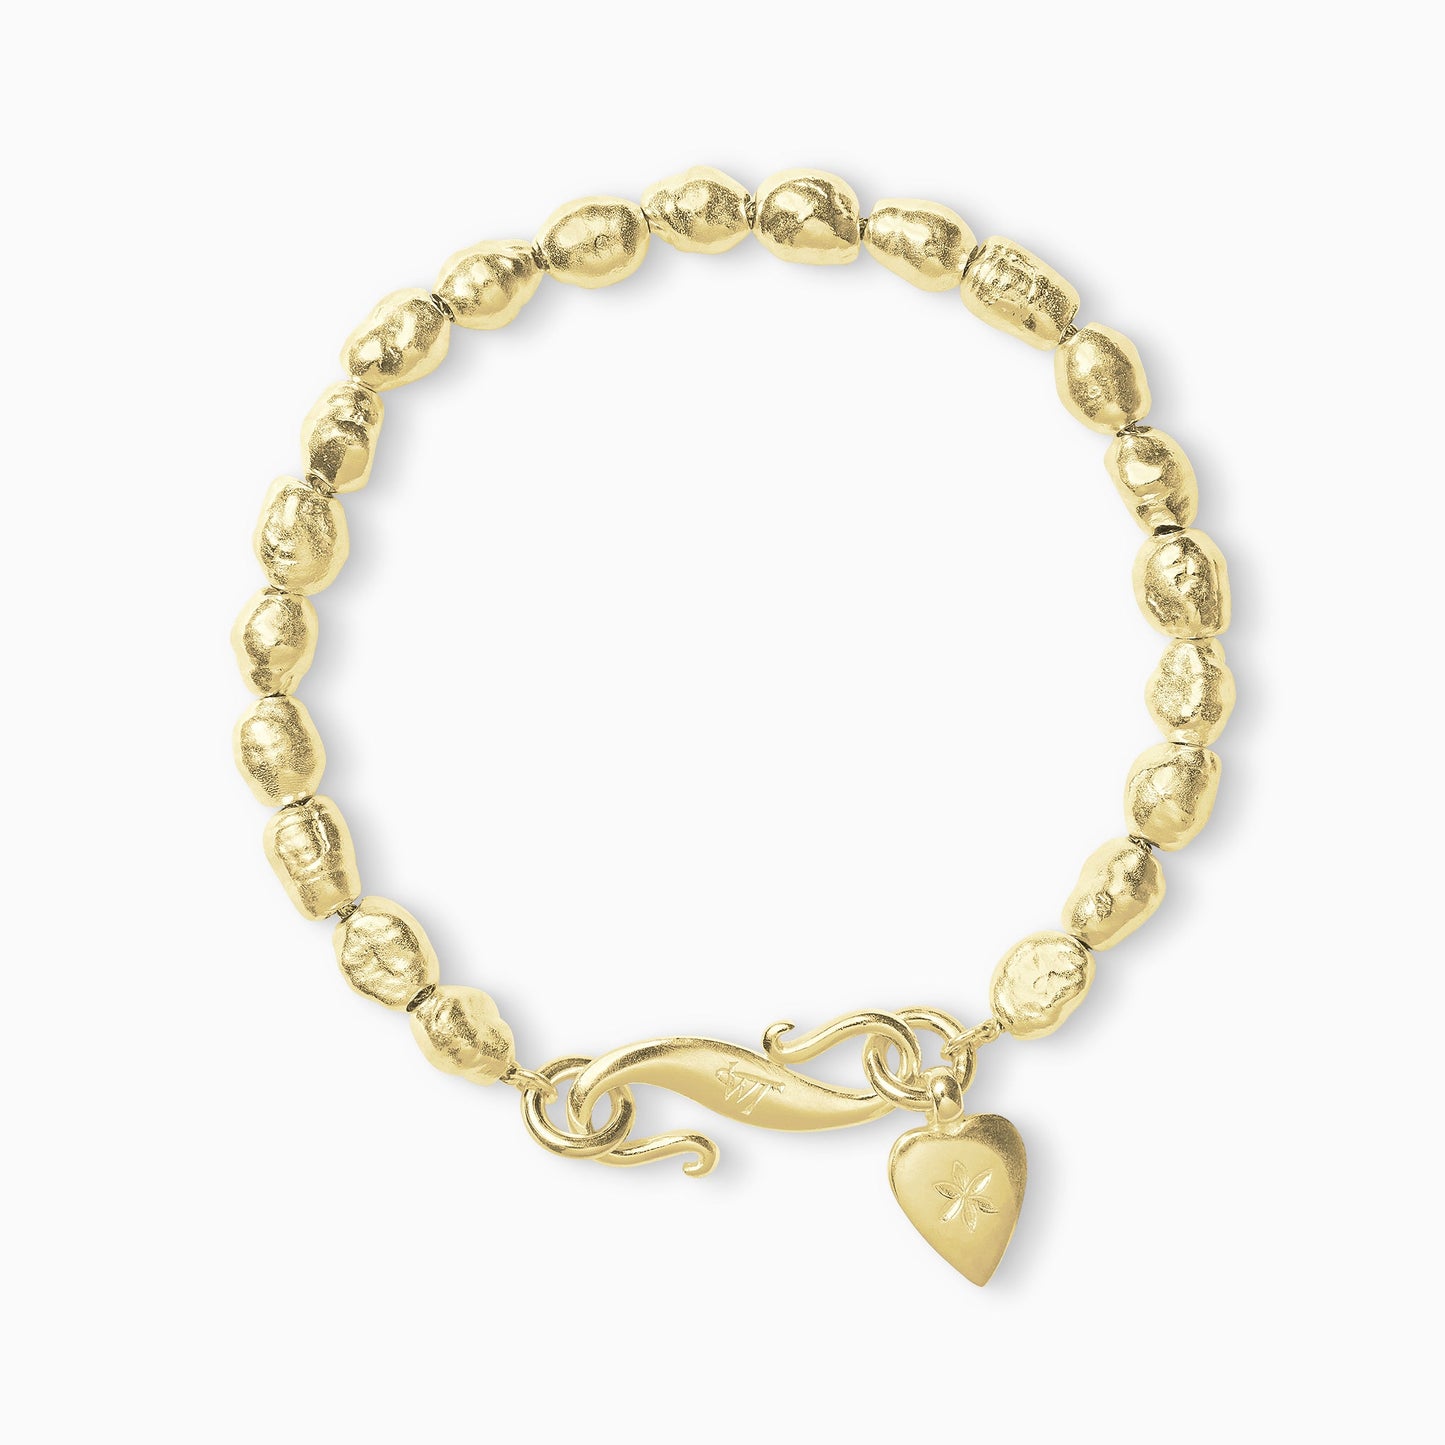 An 18ct Fairtrade yellow gold bracelet of handmade irregular pearl shaped textured beads with a smooth heart shaped charm engraved with a 6 petal flower and our signature ’S’ clasp. Bracelet length 210mm. Beads varying approximately 8mm x 6mm.